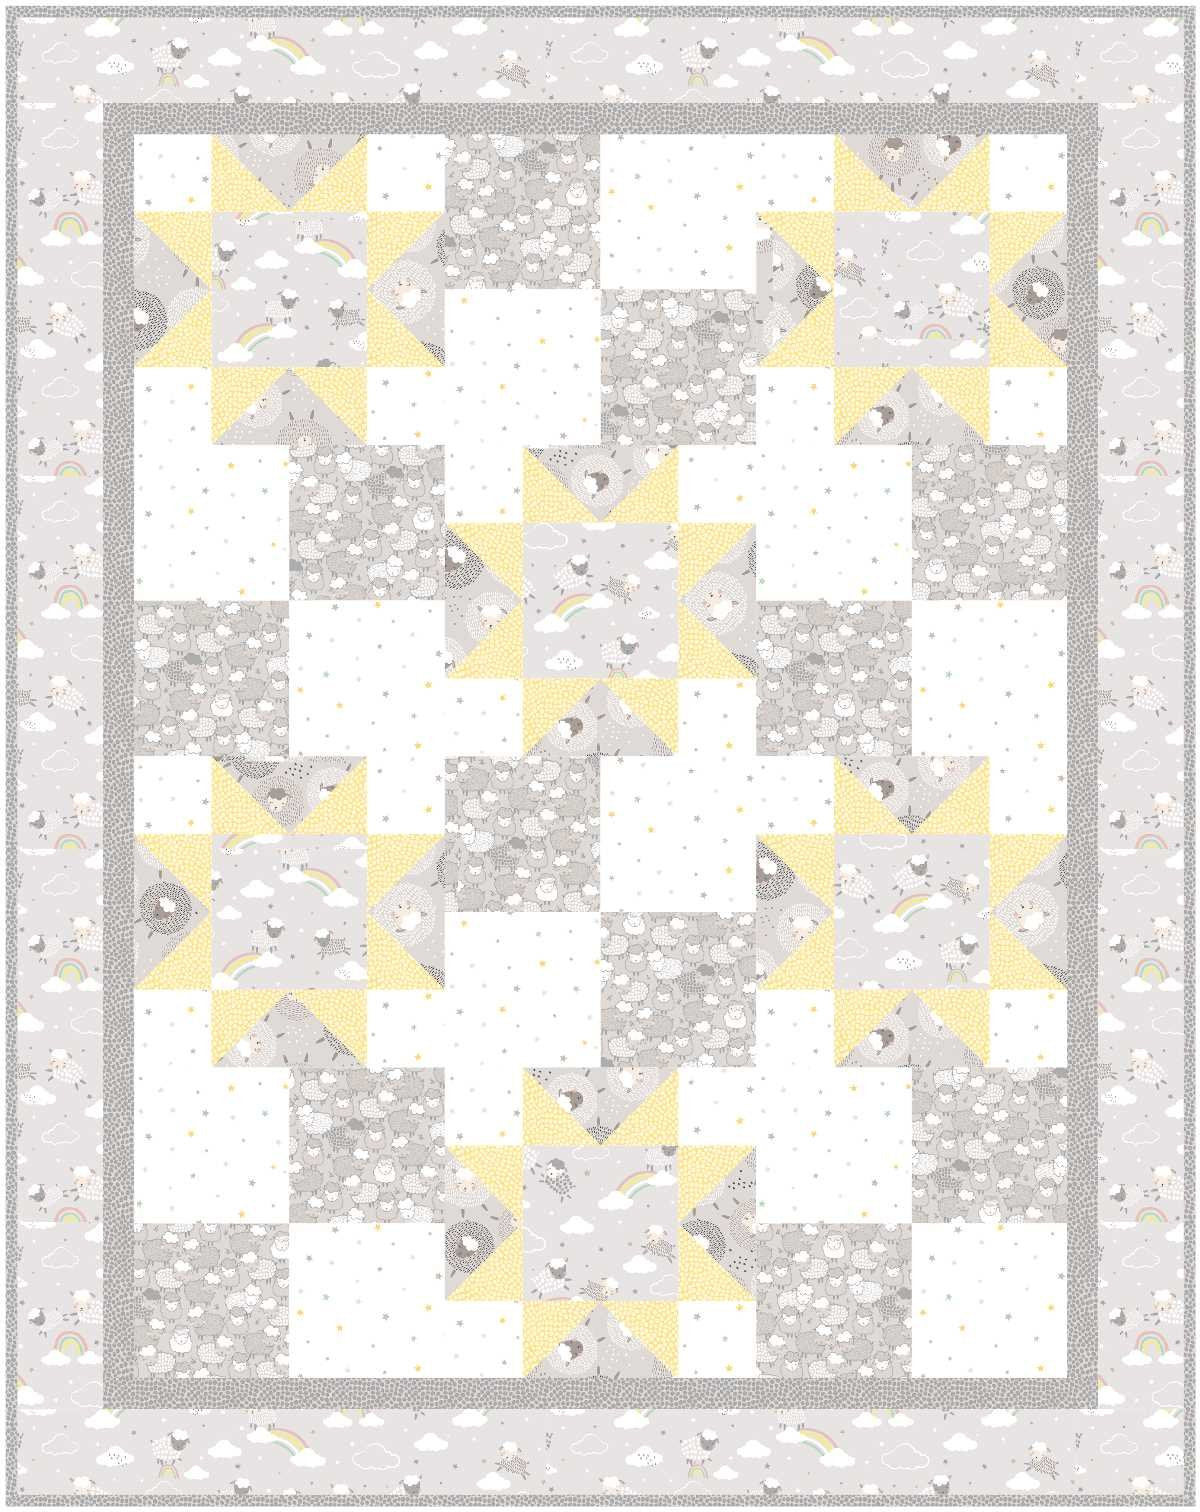 Easy Stars Quilt Pattern by Karen Bialik of The Fabric Addict